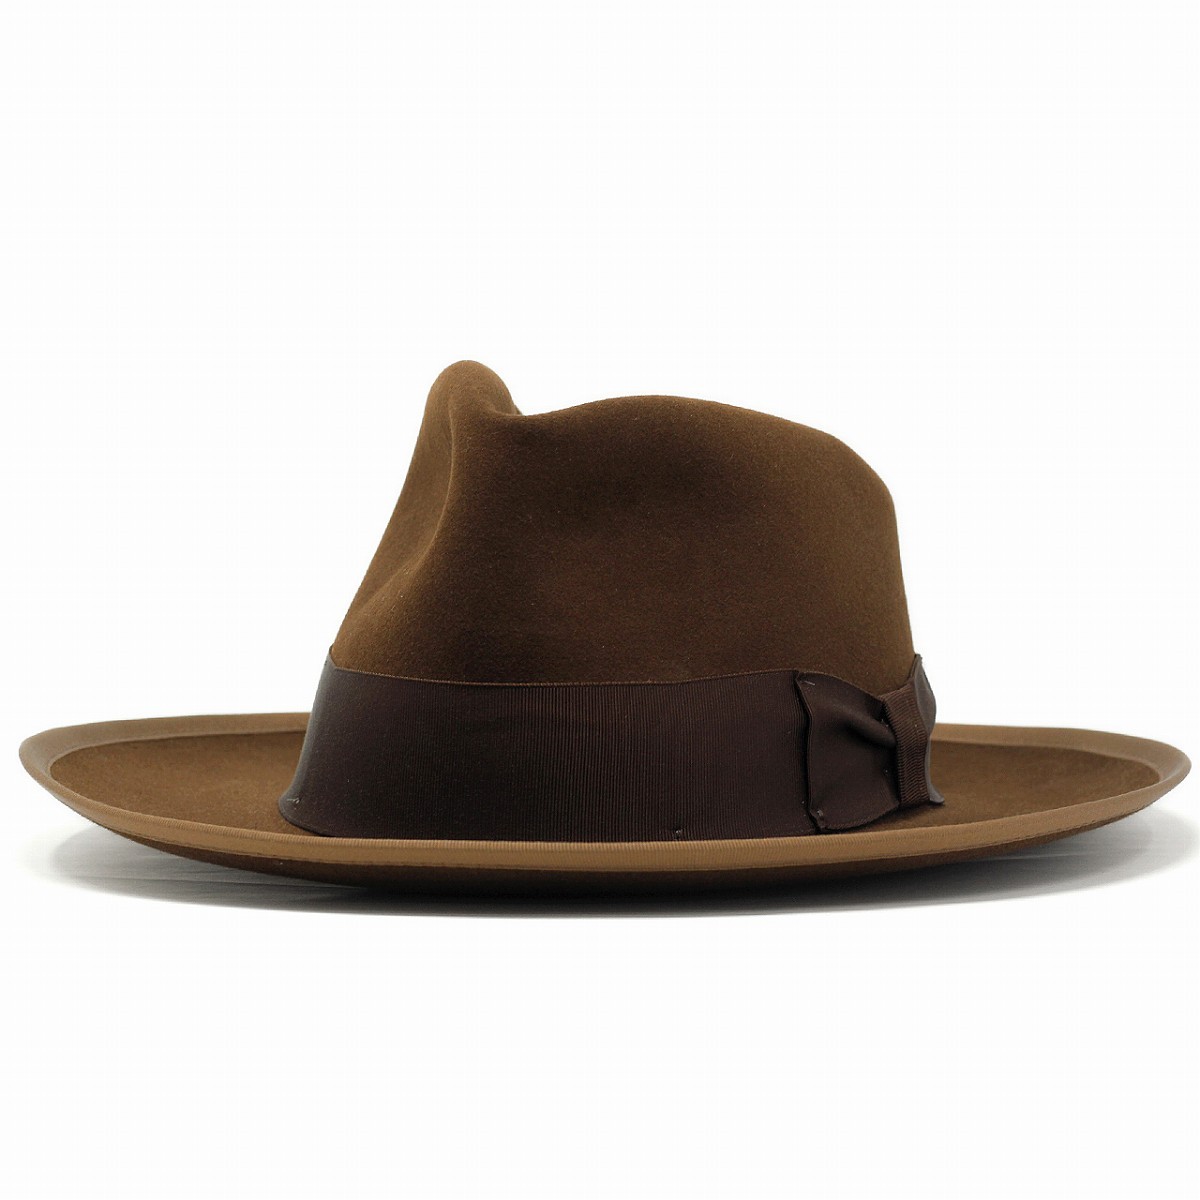 STETSON WHIPPET ステットソン リペット リプロ ハット